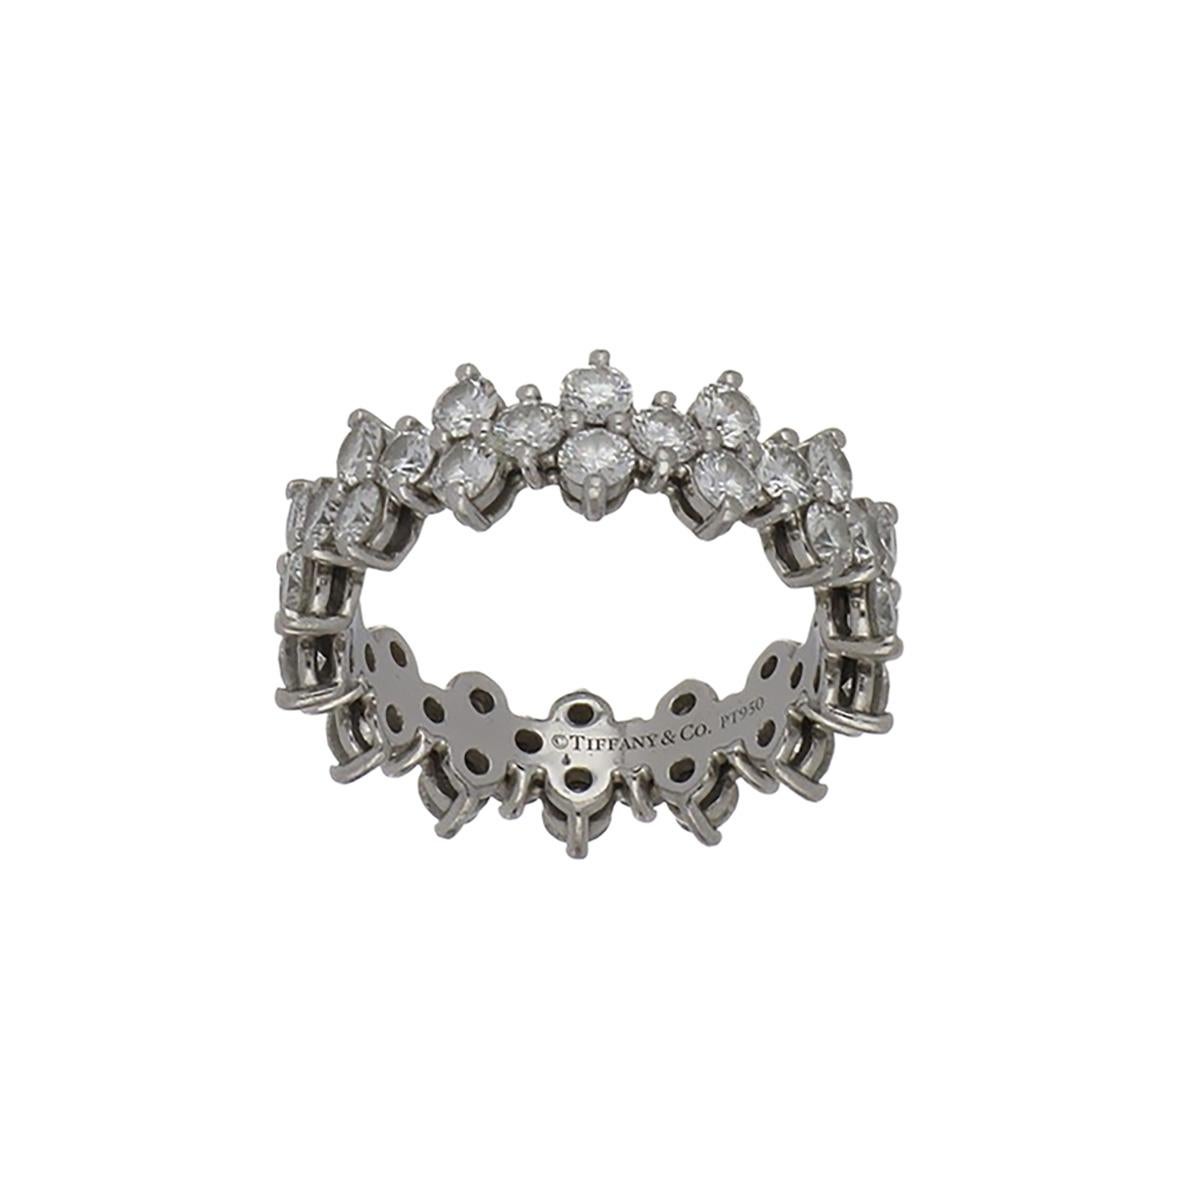 An estate Tiffany & Co. Aria round diamond eternity band in platinum. There are 40 round brilliant-cut diamonds that total 2.80 carats, F-G color and VVS1-VS2.  Circa 2010.  Size 5 3/4; not sizeable.